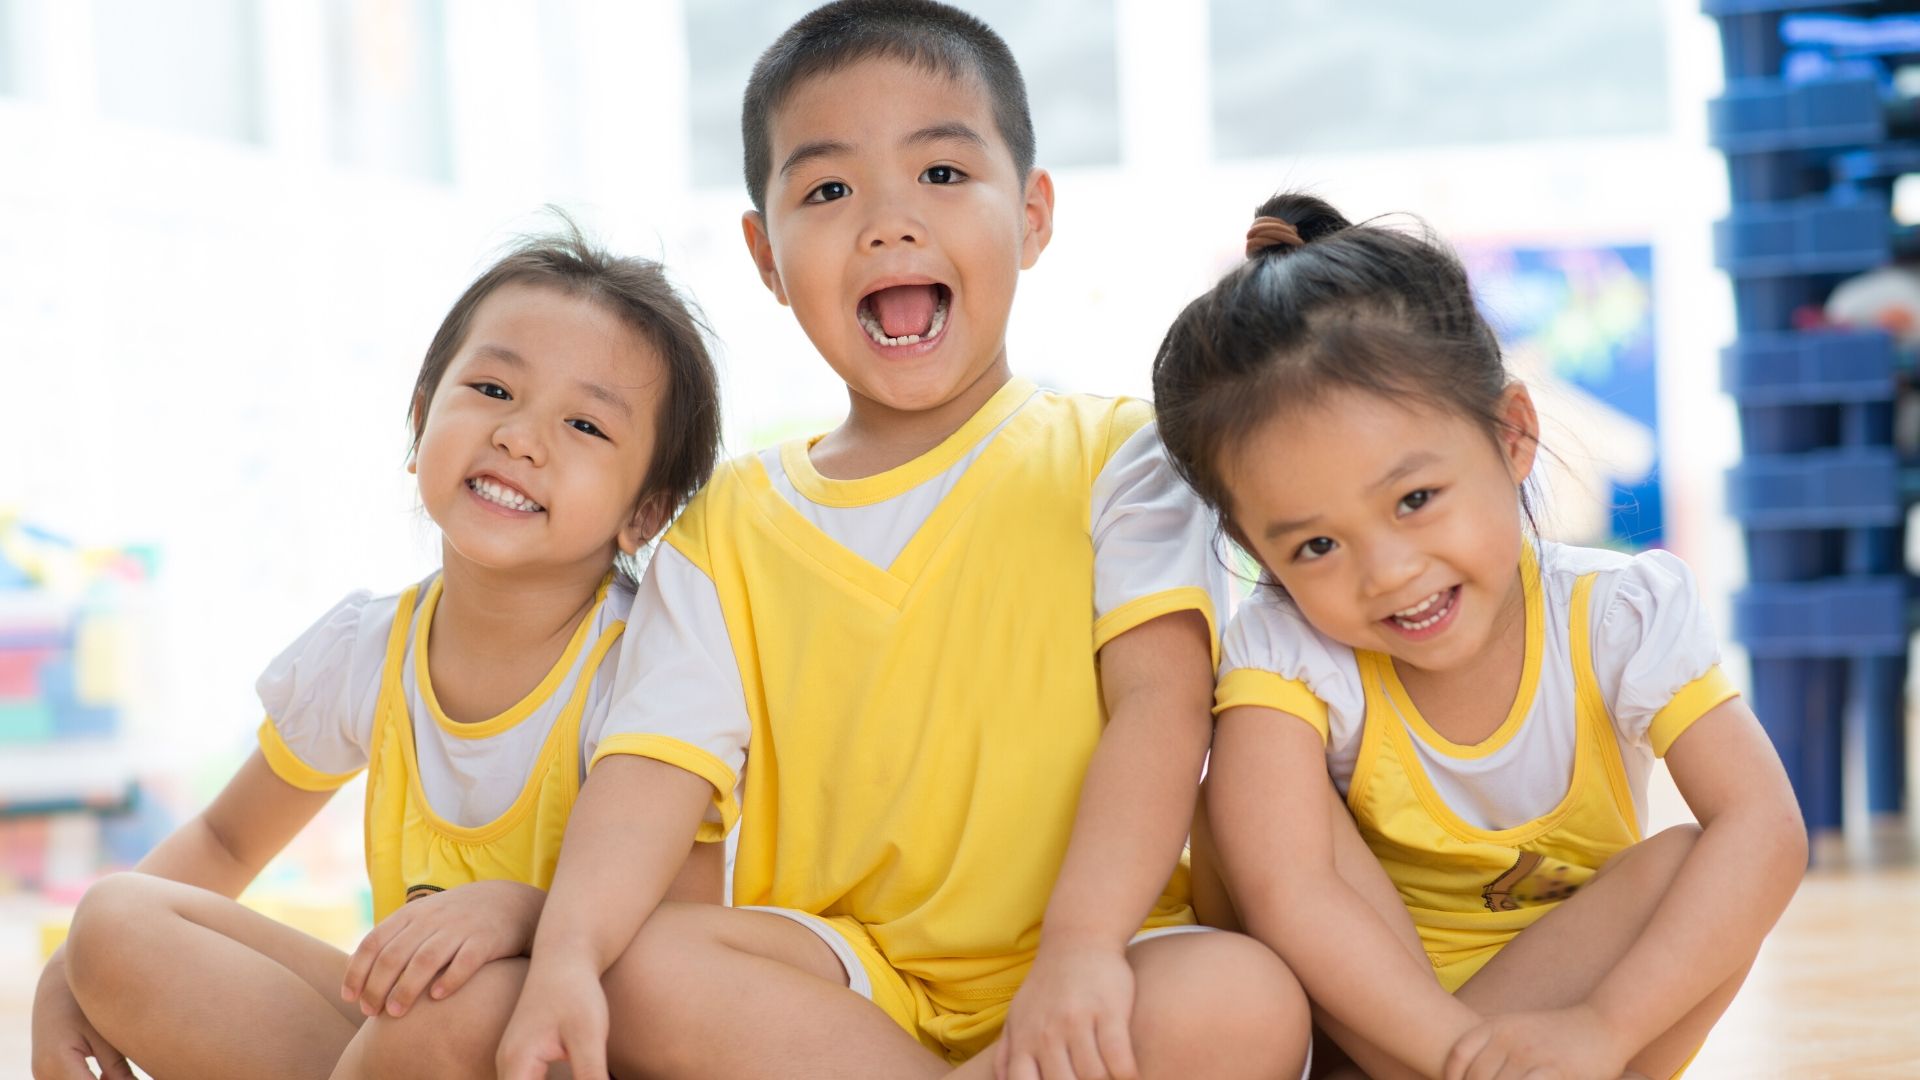 Image: Three asian siblings wearing matching yellow outfits